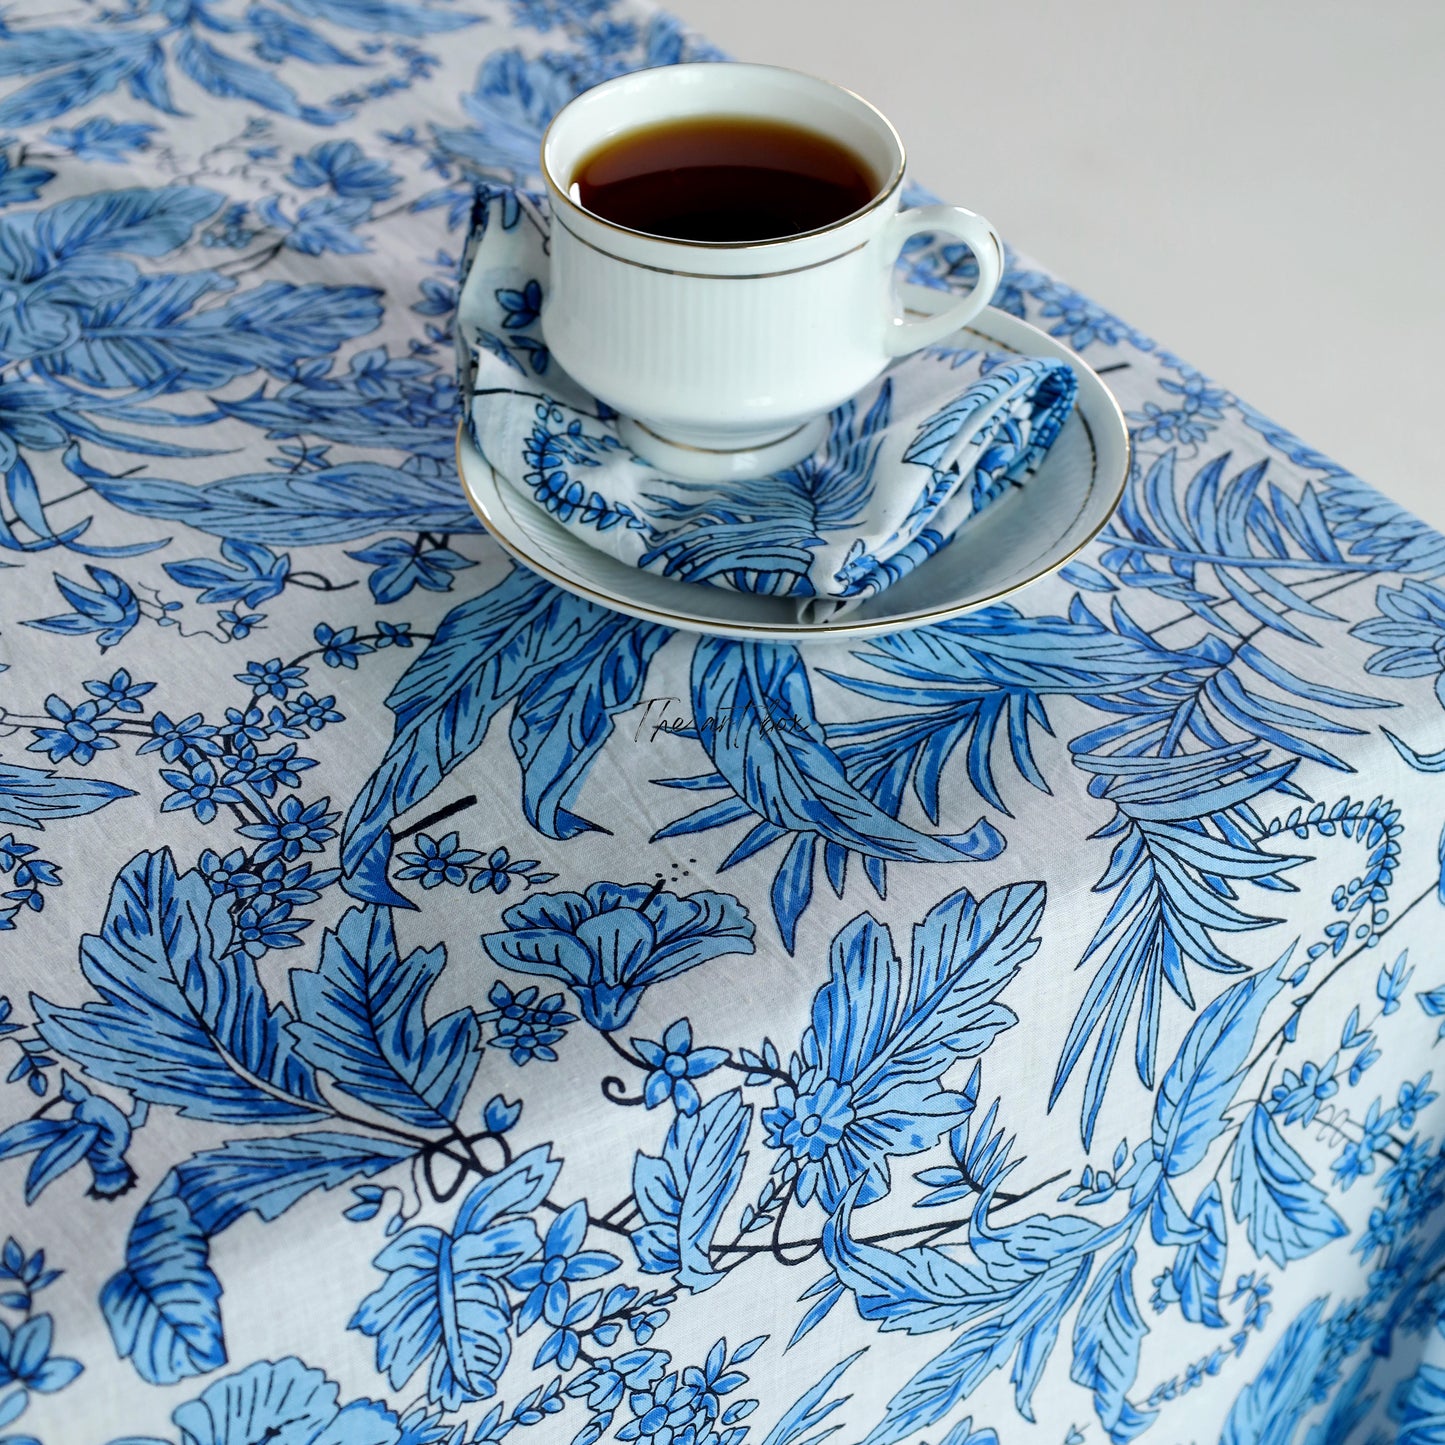 Sky Blue Tablecloth Floral Printed Cotton Table Cover